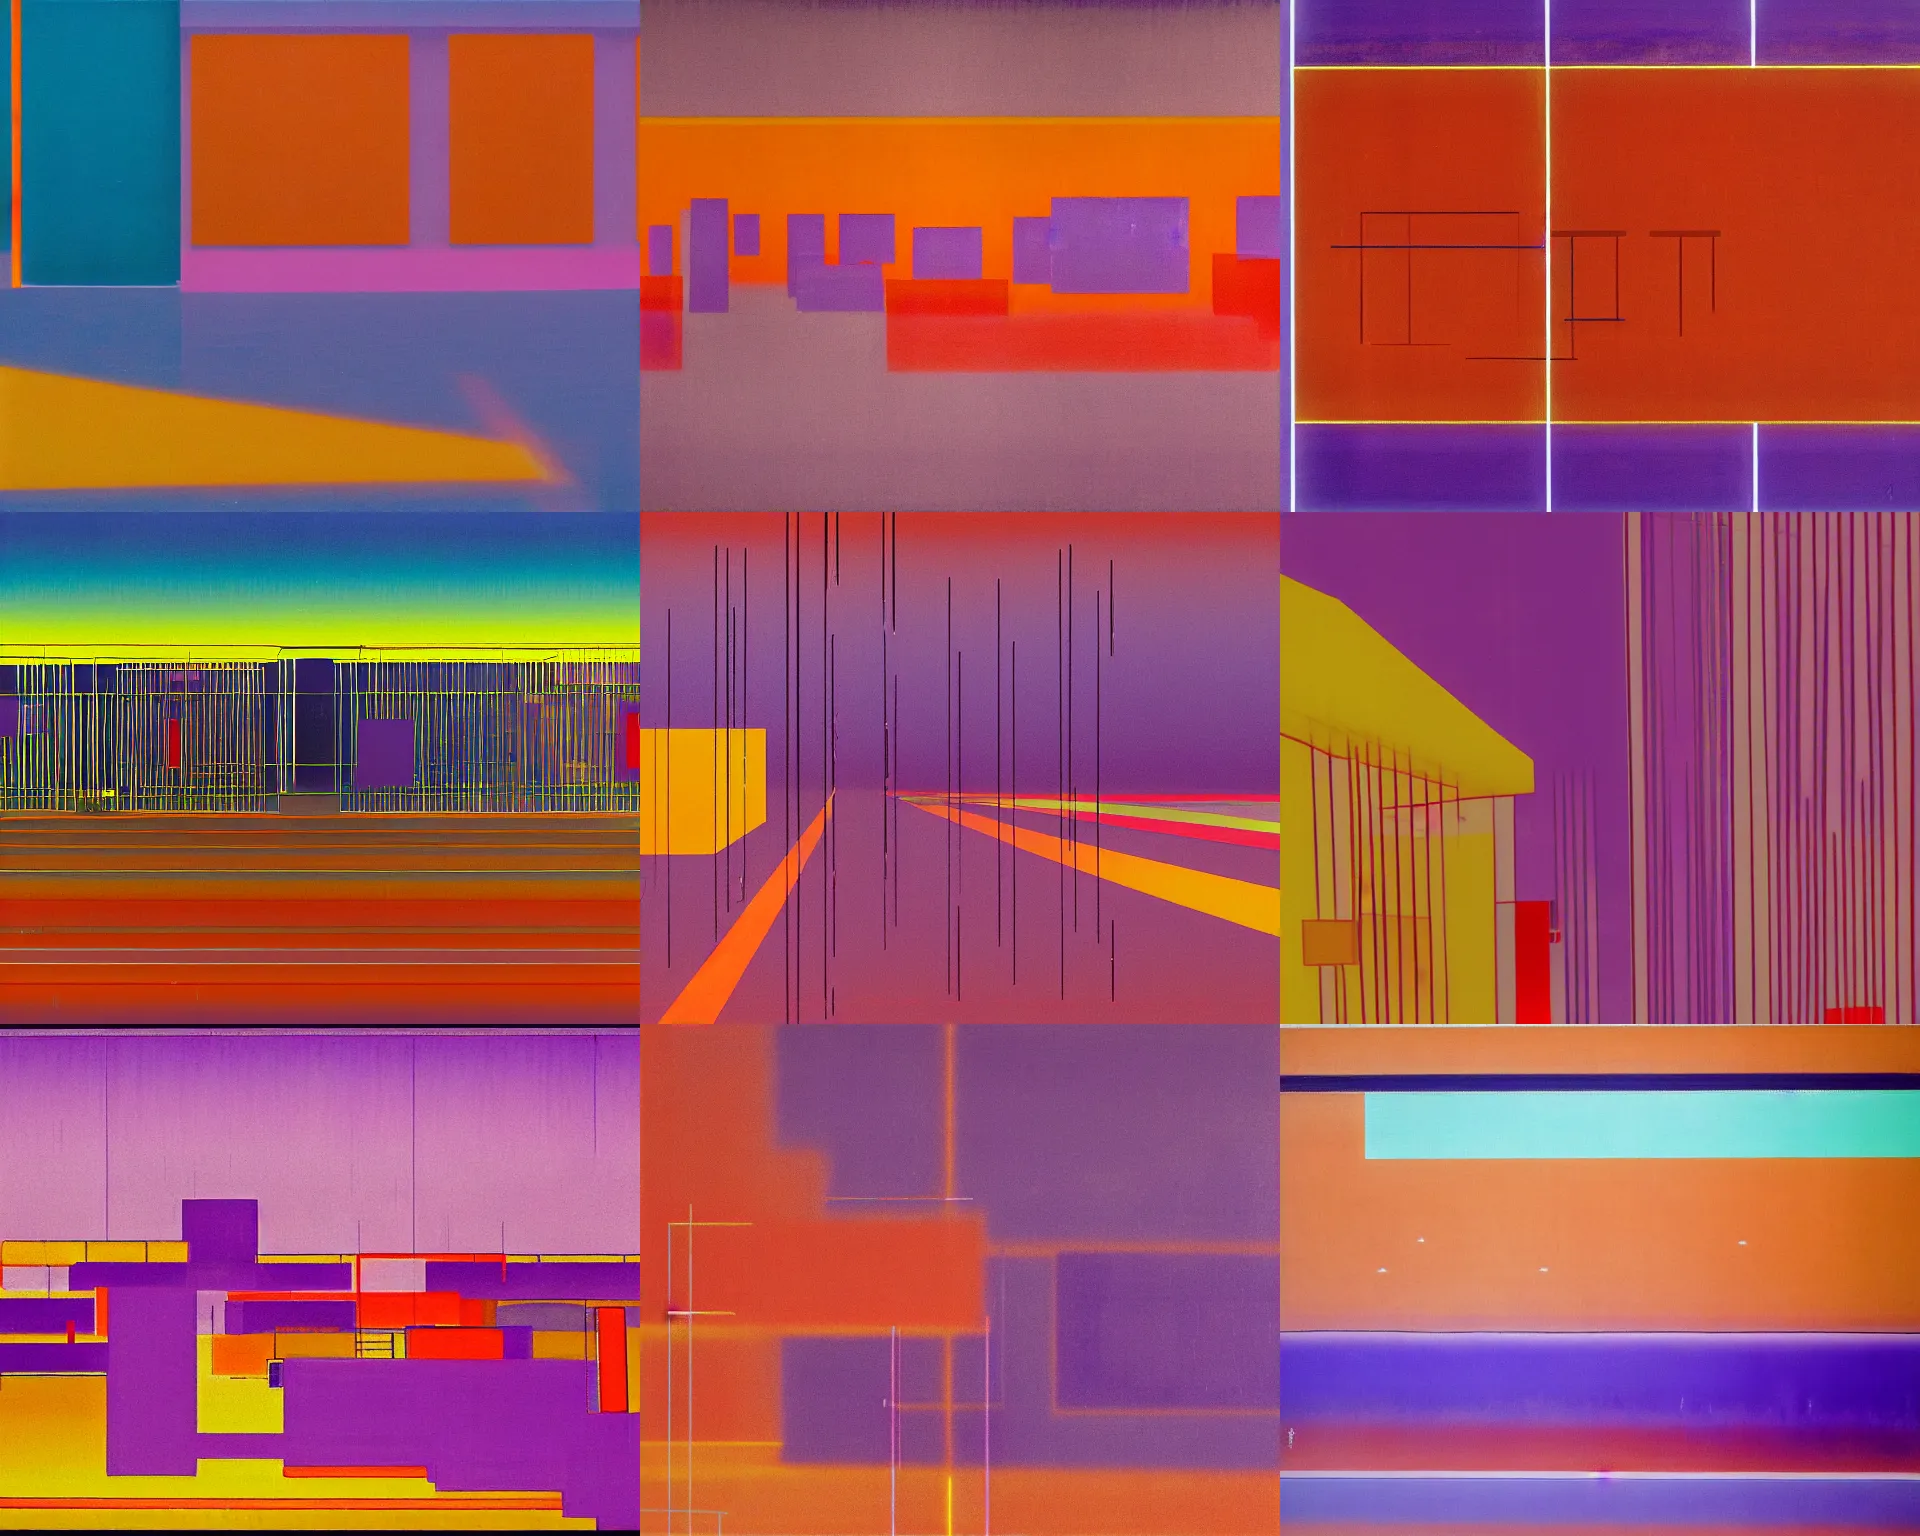 Prompt: purple Japanese city in the distant future. Rain on glass, neon signs, empty. a Rothko painting. three horizontal rectangles. one is yellow, one is red, one is light orange. The red one is the thinnest and has several thin yellow lines running through it with a peak in the middle. The city is seen in high resolution and detail. Impossible sense of scale and depth, bright lights, rain, purple. Future city. wet, shiny, hyper realistic city scene